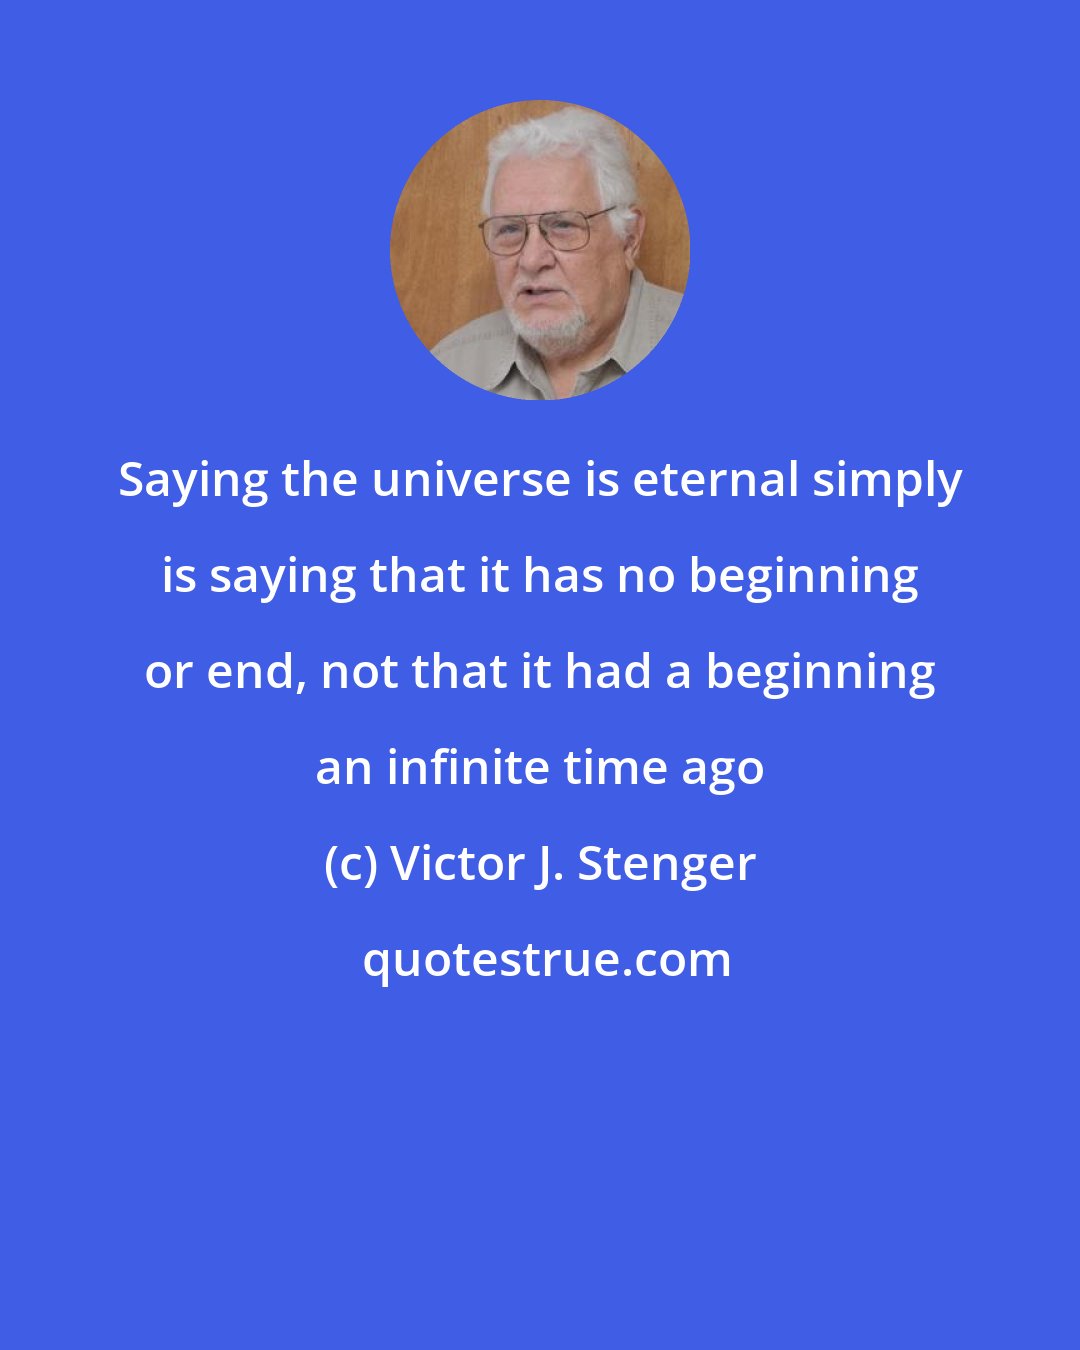 Victor J. Stenger: Saying the universe is eternal simply is saying that it has no beginning or end, not that it had a beginning an infinite time ago